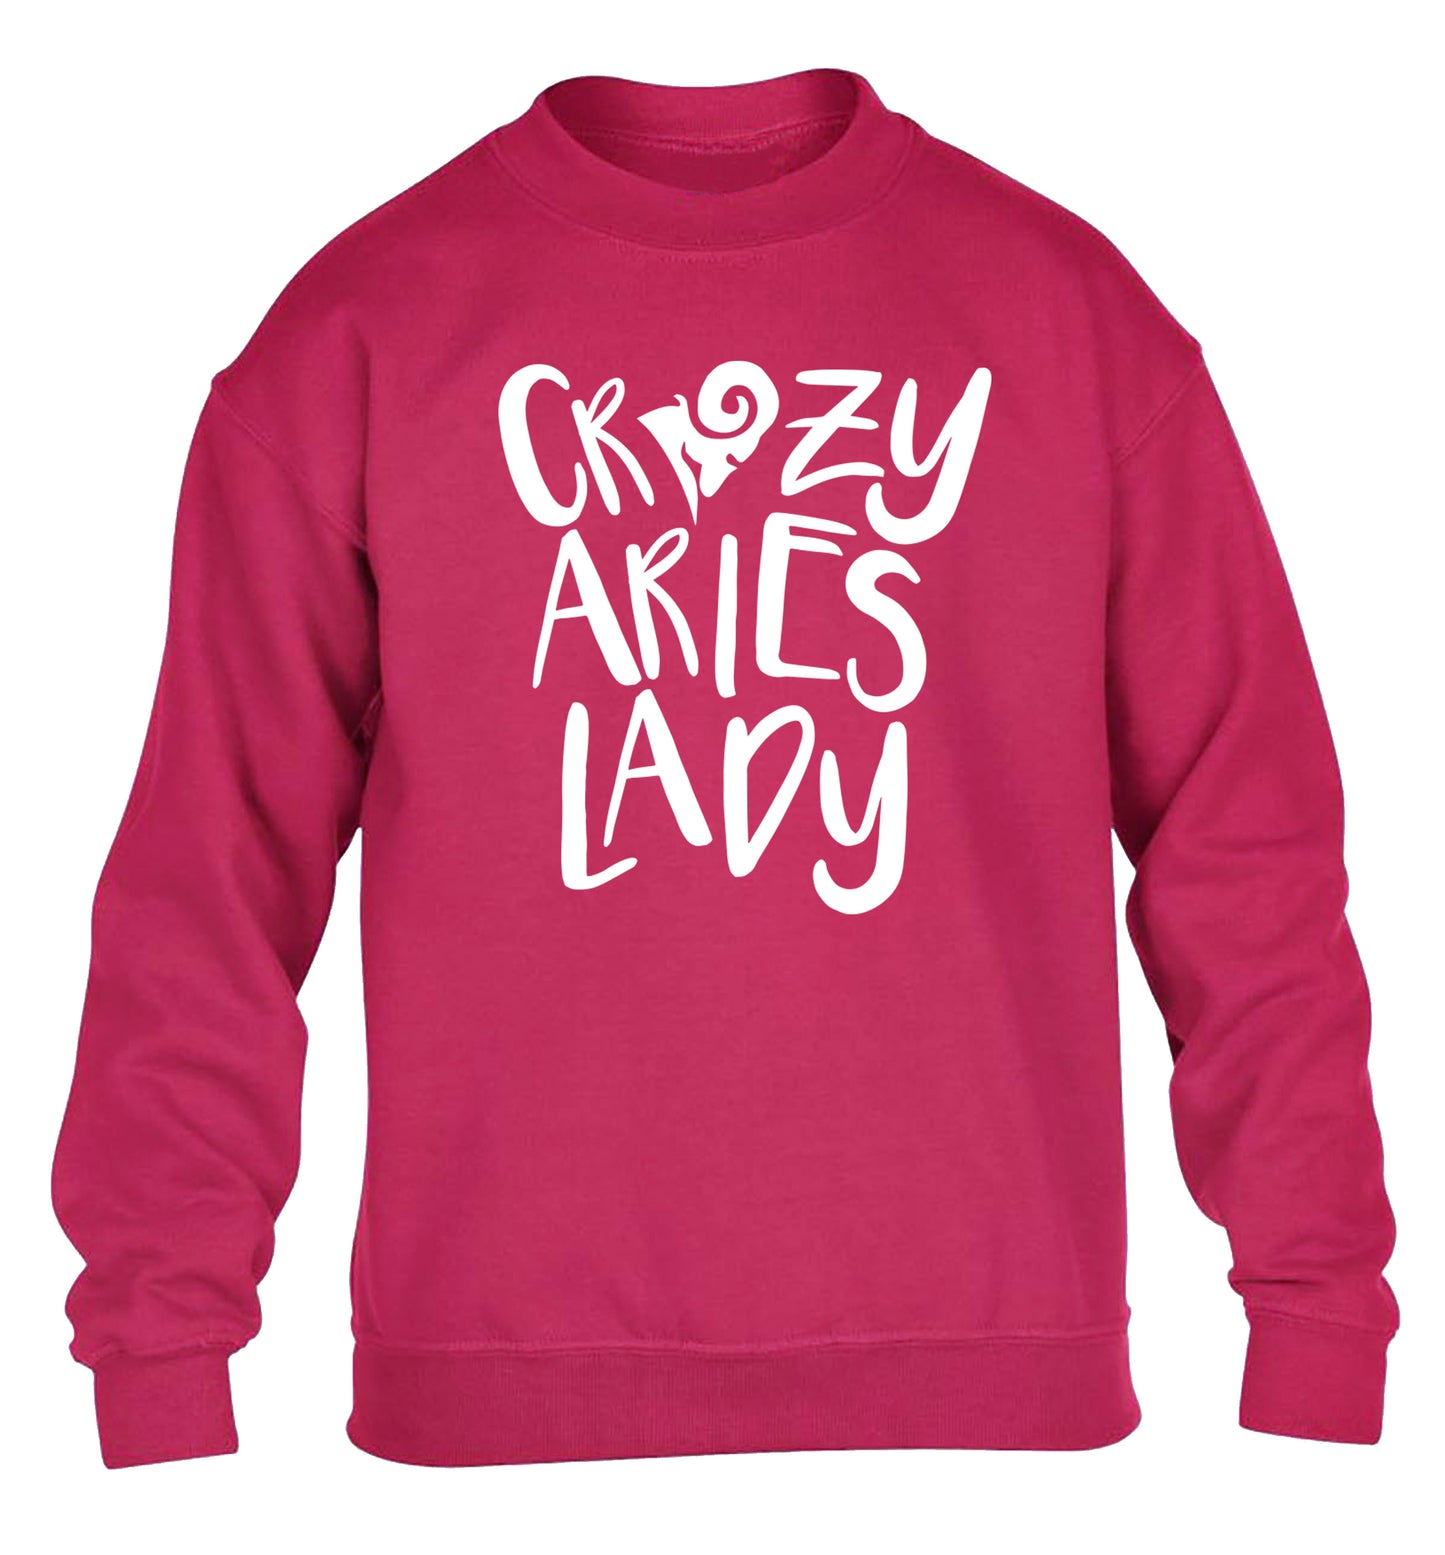 Crazy aries lady children's pink sweater 12-13 Years